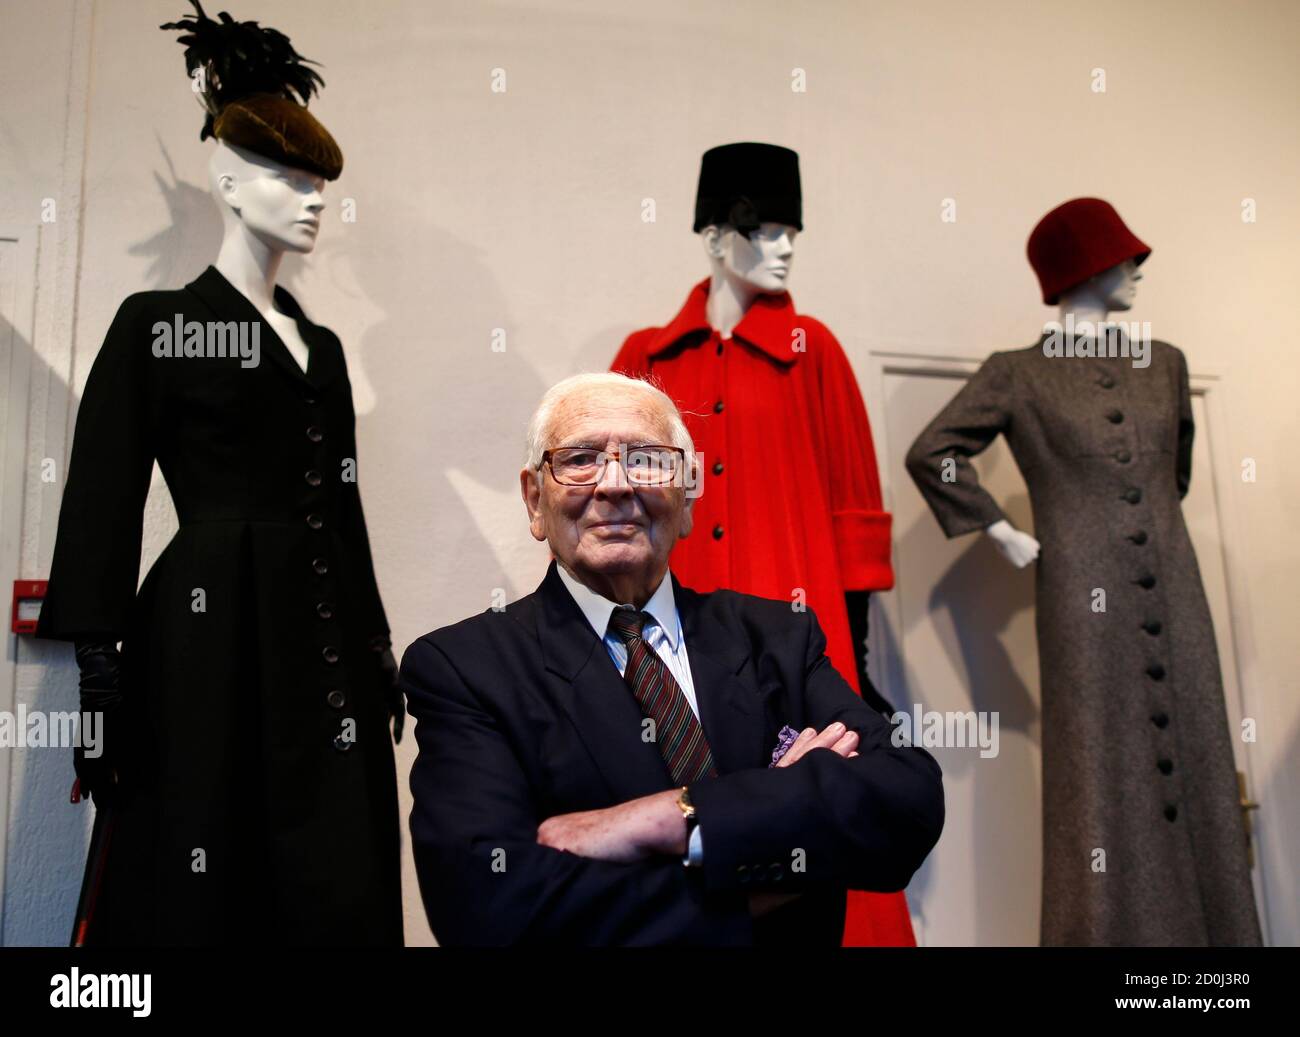 French fashion designer Pierre Cardin poses in front of his 1951-1952 first  fashion creations in his museum called "Past-Present-Future" in Paris  November 12, 2014. The museum will open on November 13 and